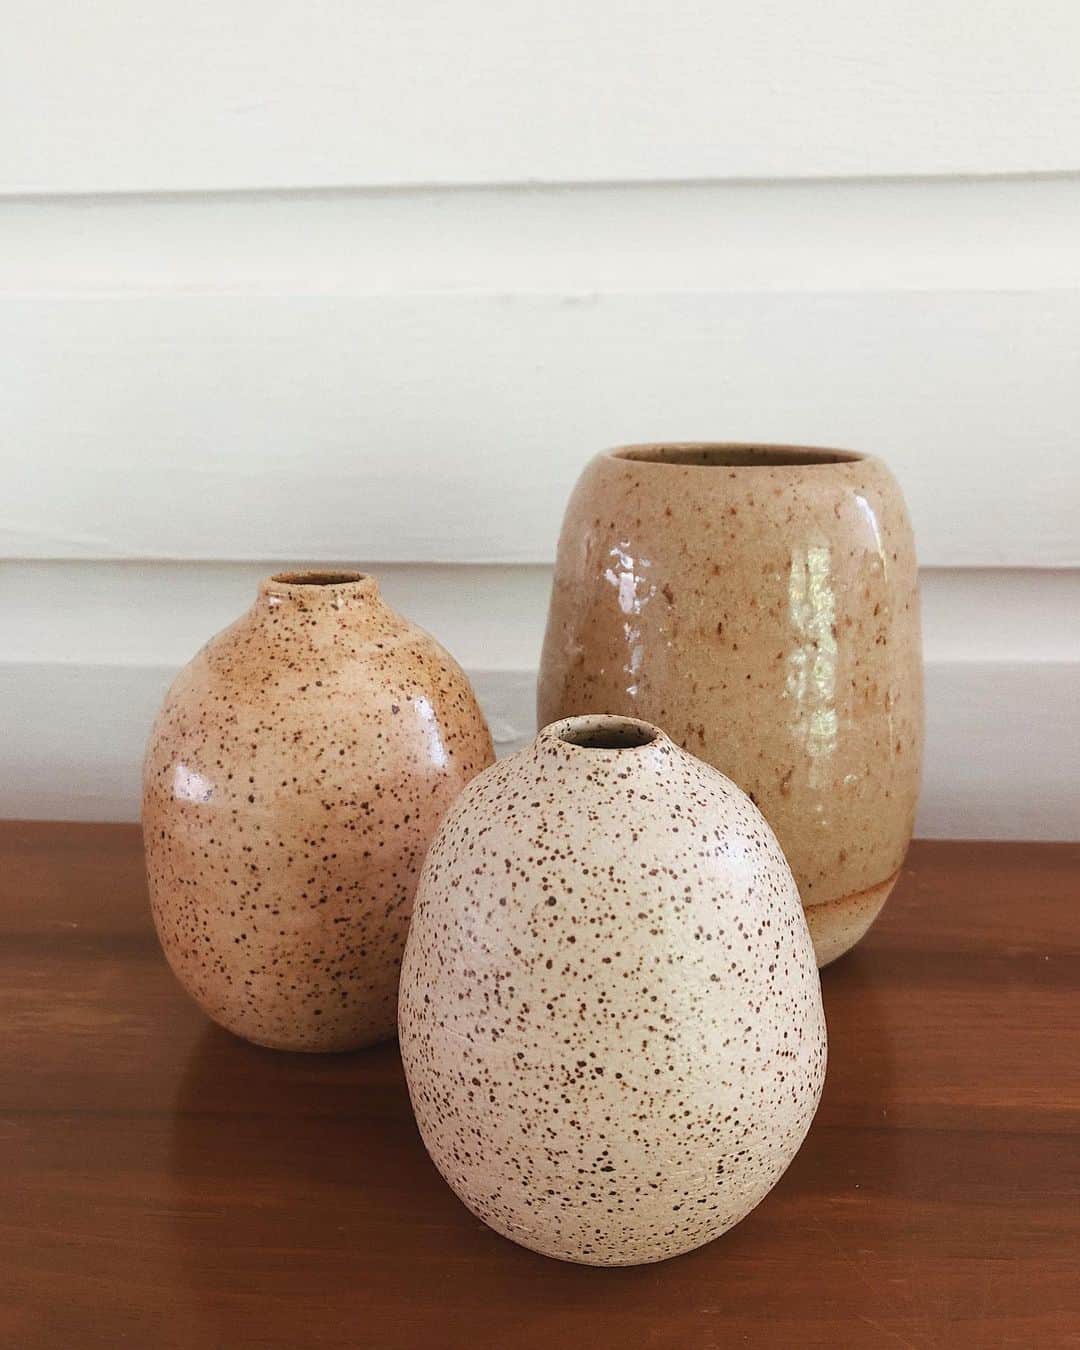 Tamikoのインスタグラム：「welcoming these babies to the world ✨🌼🥚✨ some friends asked about more little vases so I’ve been having fun adding more curves and experimenting with closed form. I have a few more in the oatmeal color, let me know if you’d like me to save you one perhaps for Mother’s Day or your home :) 最近こんなのも作っます〜どうですか？ #handmade #tamikoclaire #ceramics #curvy #vase  #陶芸 #花瓶」